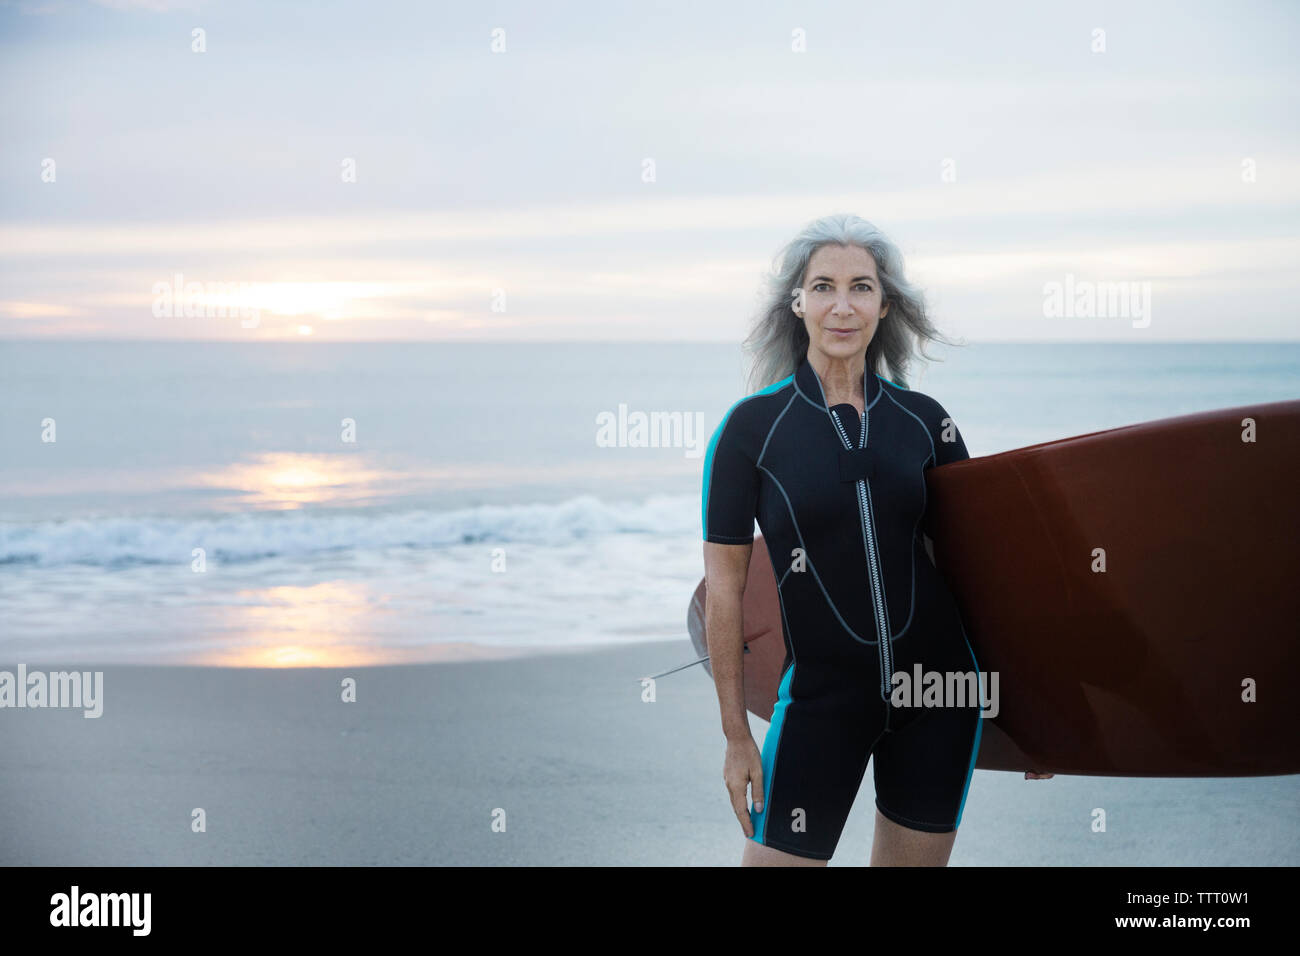 Portrait of confident female surfer carrying surfboard at Delray Beach Stock Photo